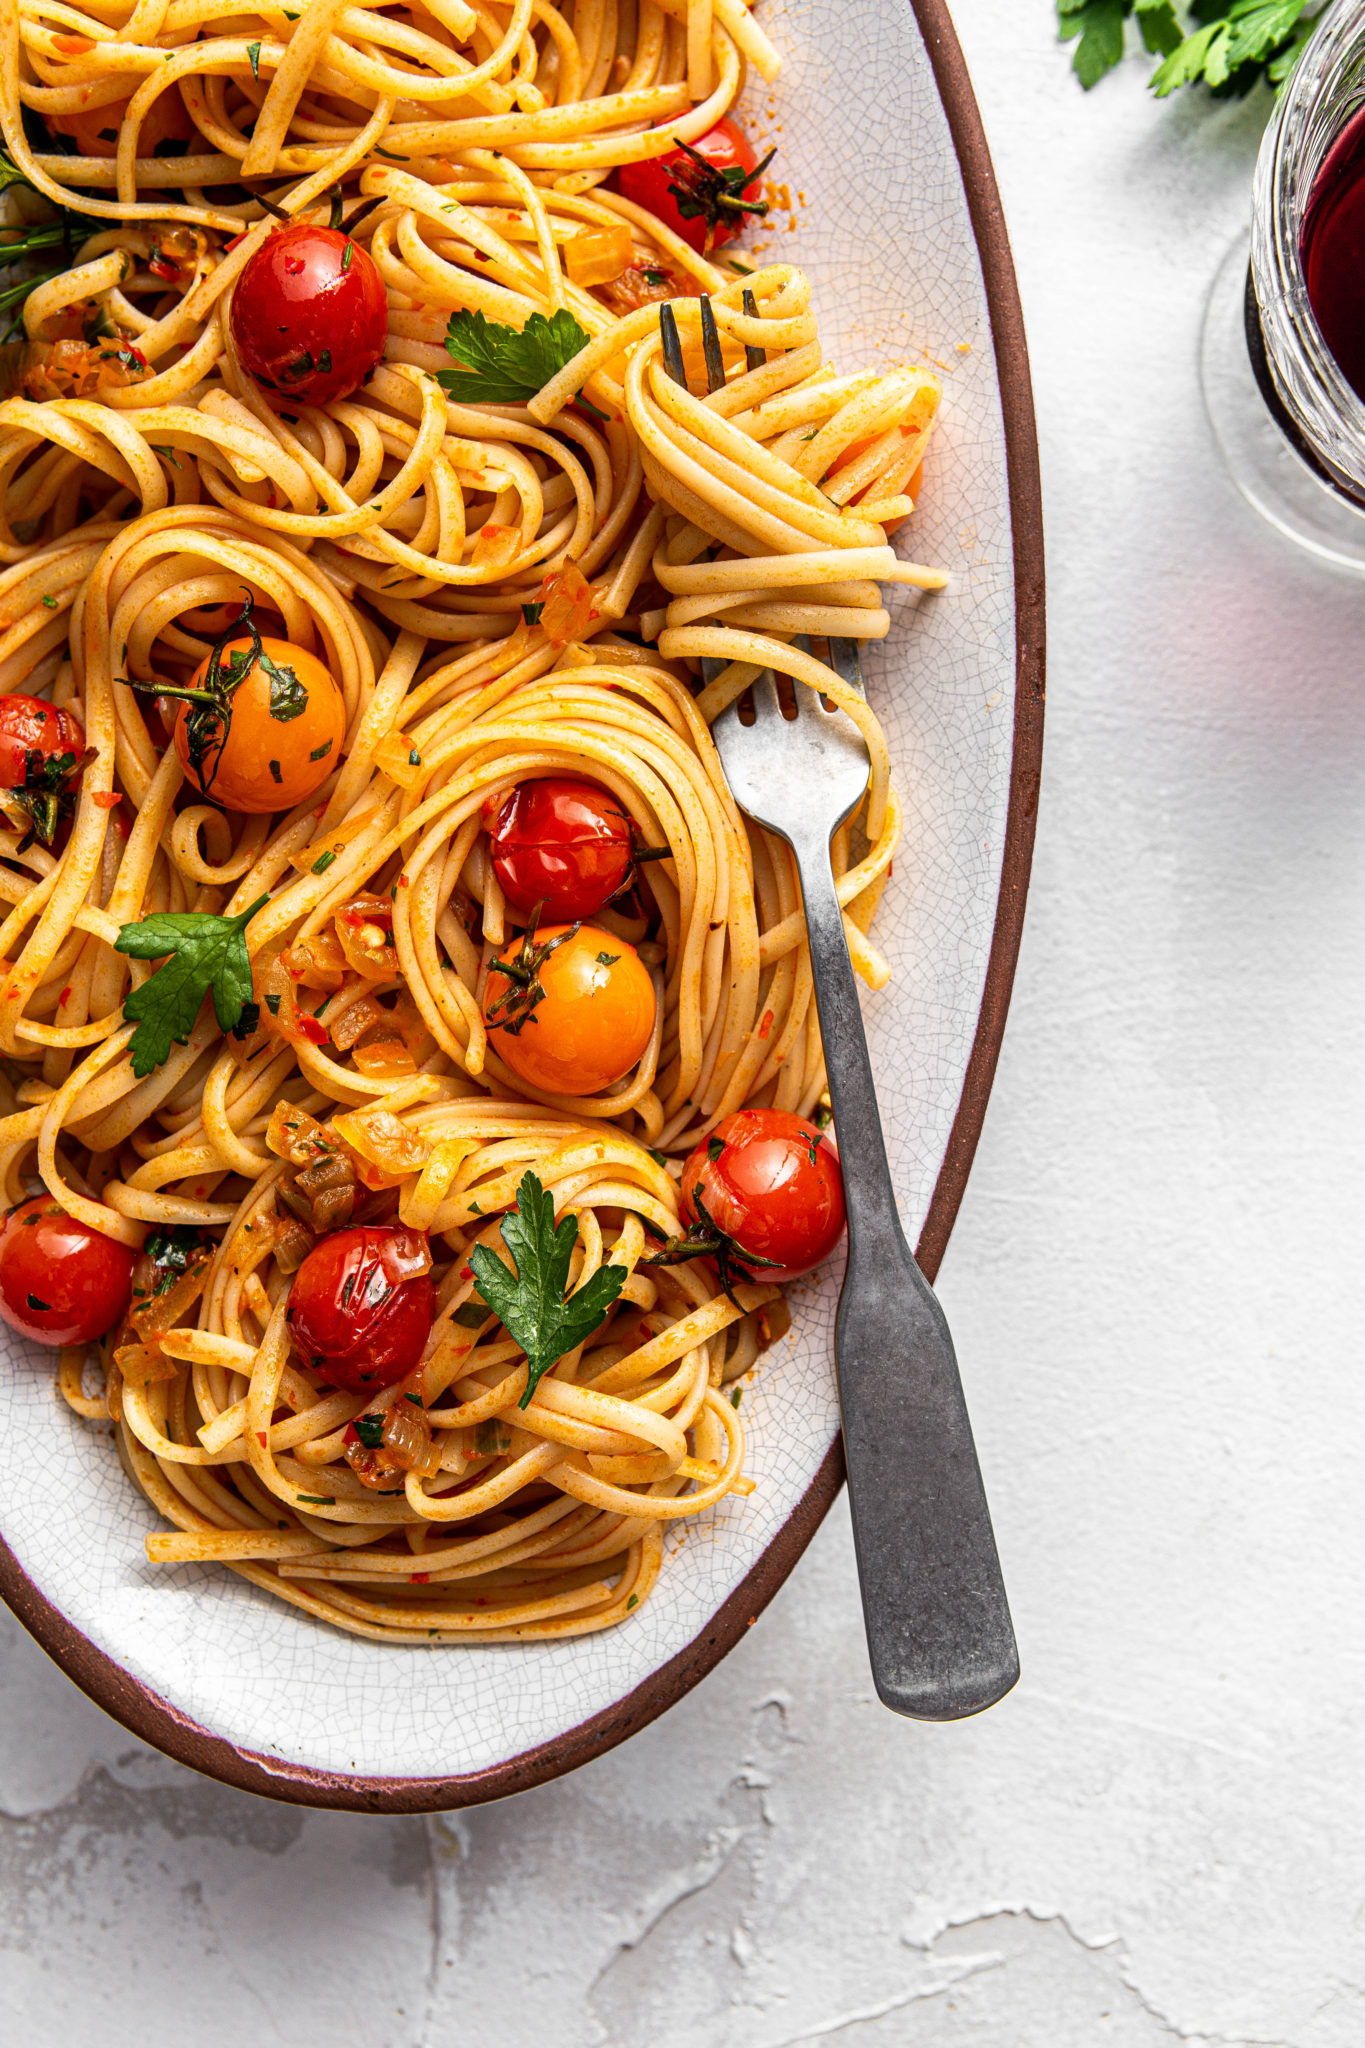 fettuccine noodles with harissa and cherry tomatoes parsley and red wine glass